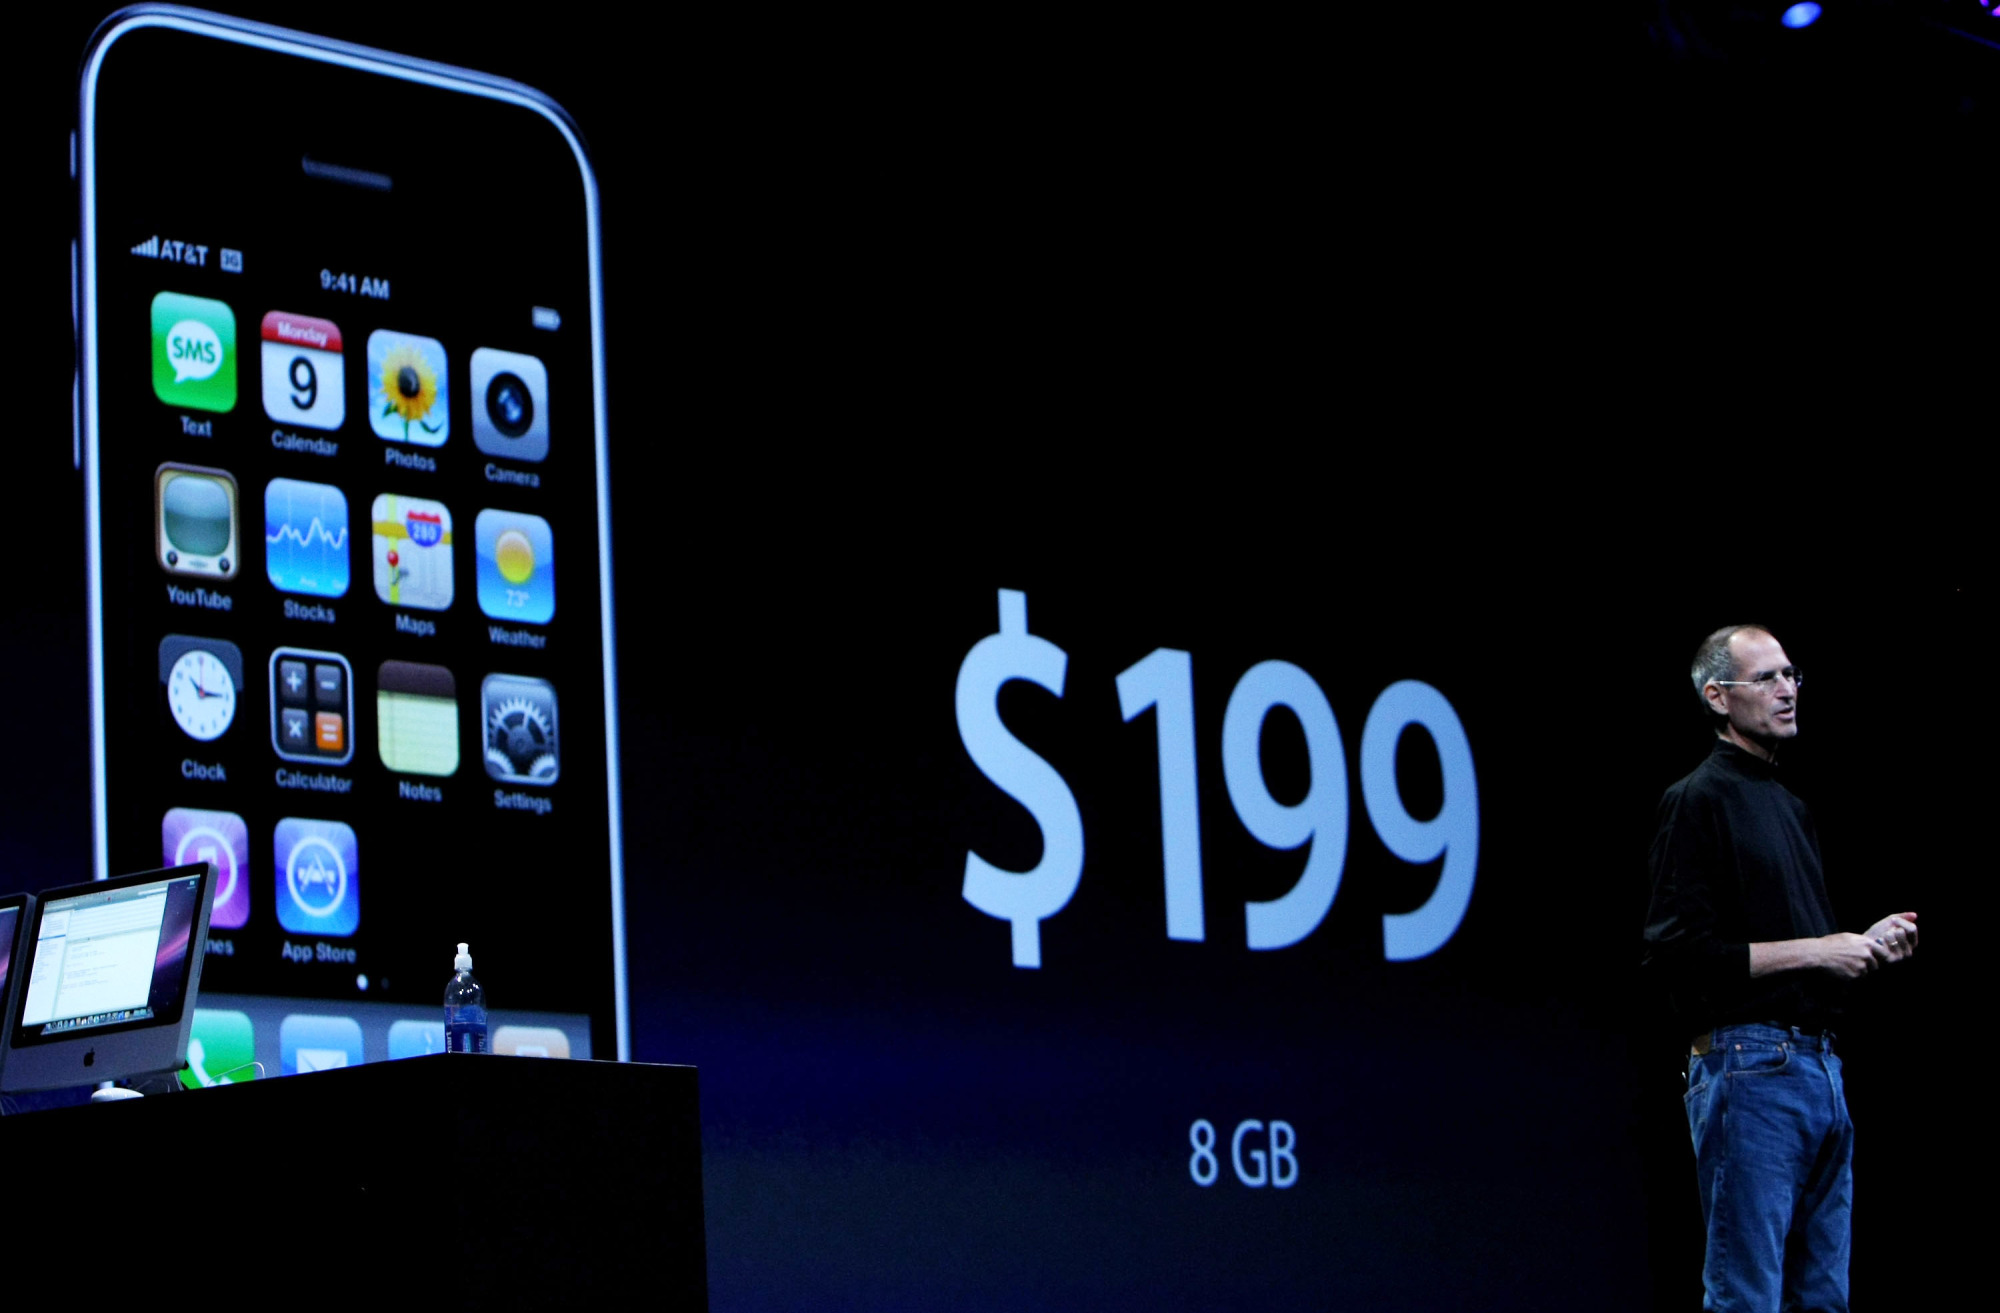 Image of Steve Jobs on stage introducing the iPhone 3G